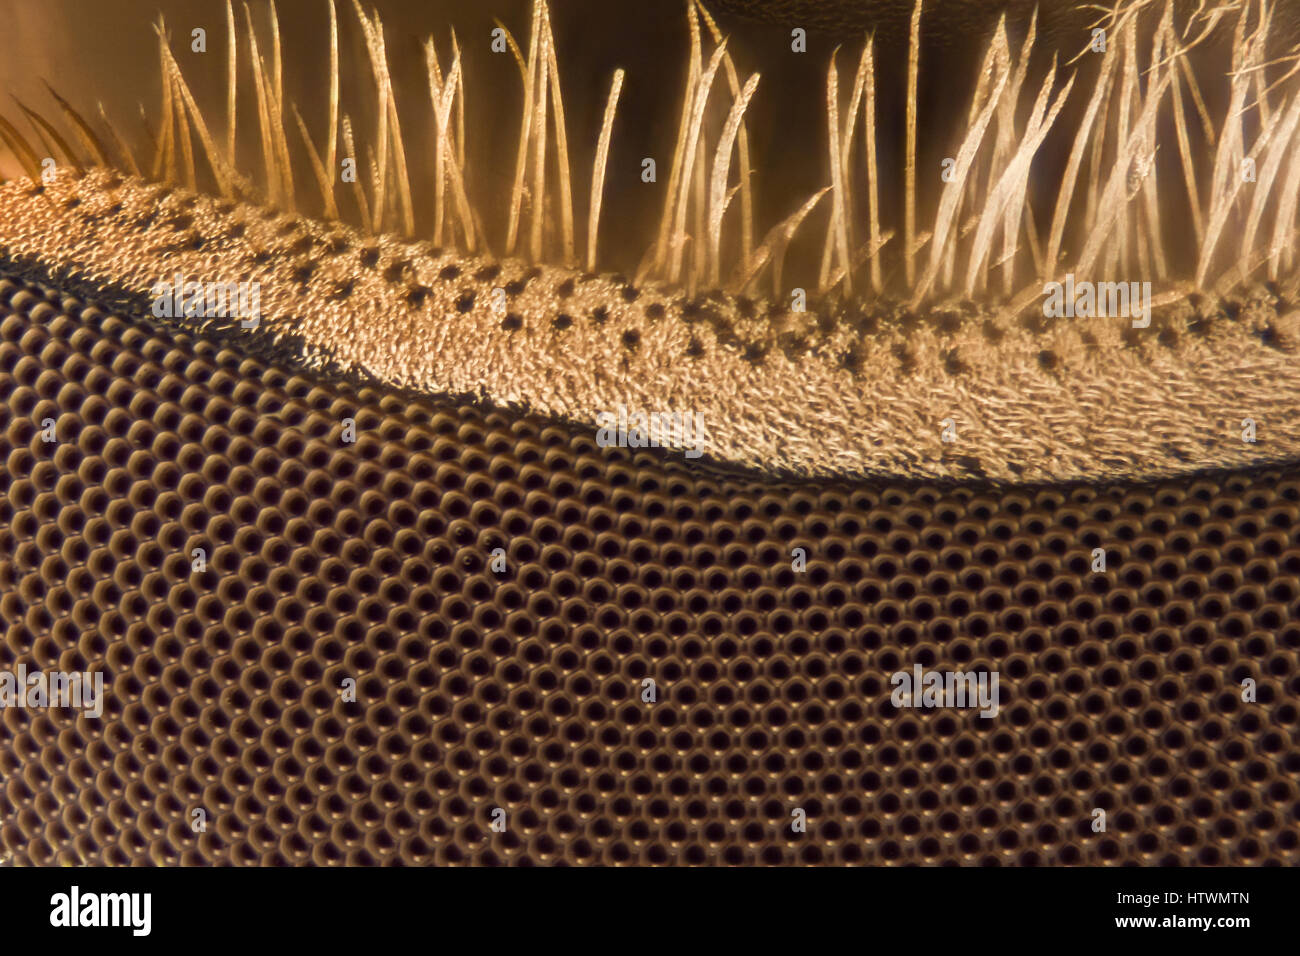 Extreme magnification - Fly compound eye Stock Photo